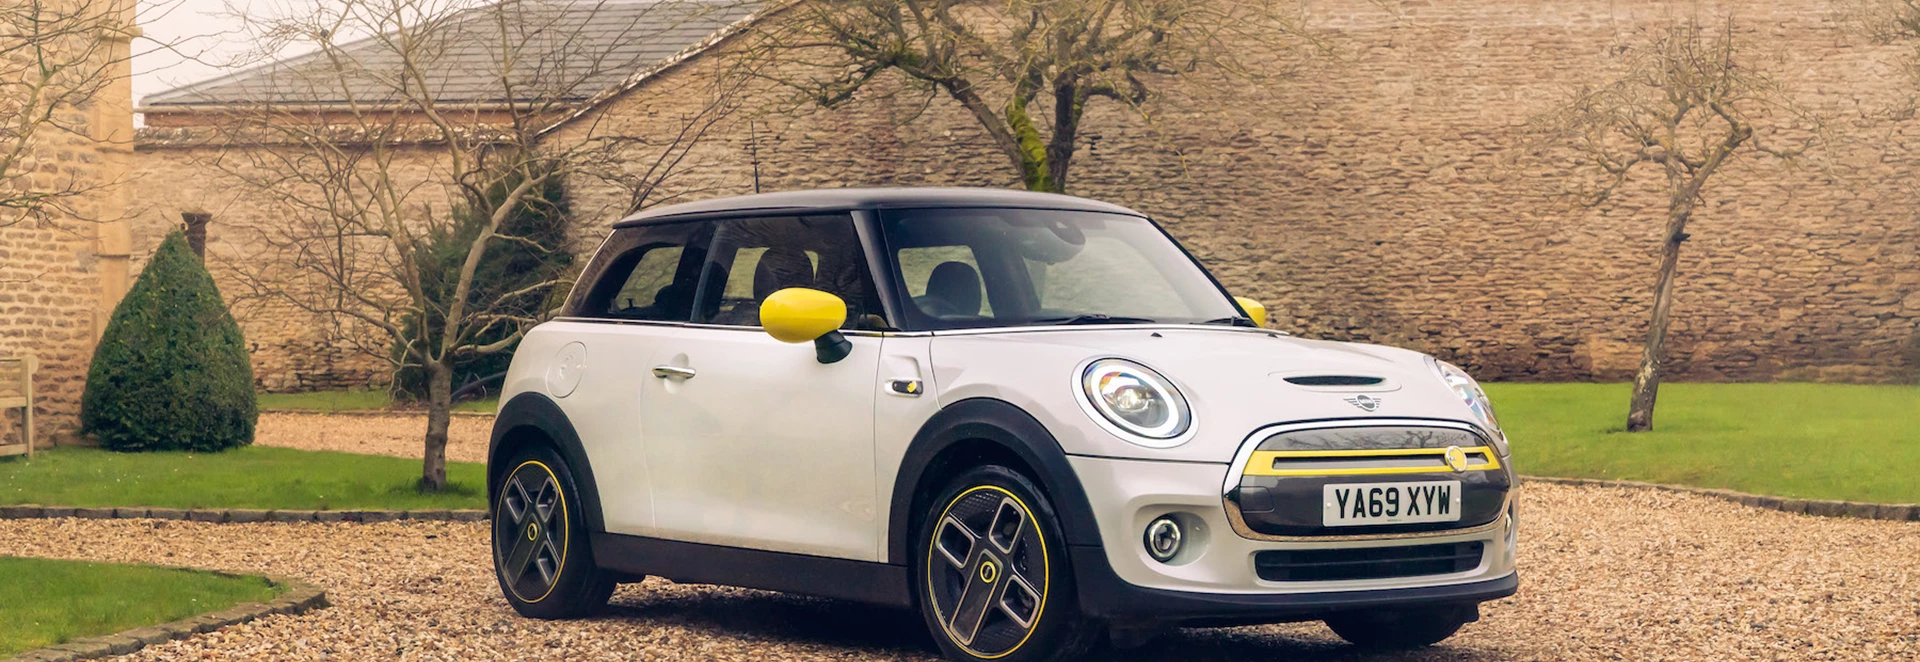 5 reasons why the Mini Electric is the perfect inner-city company car 